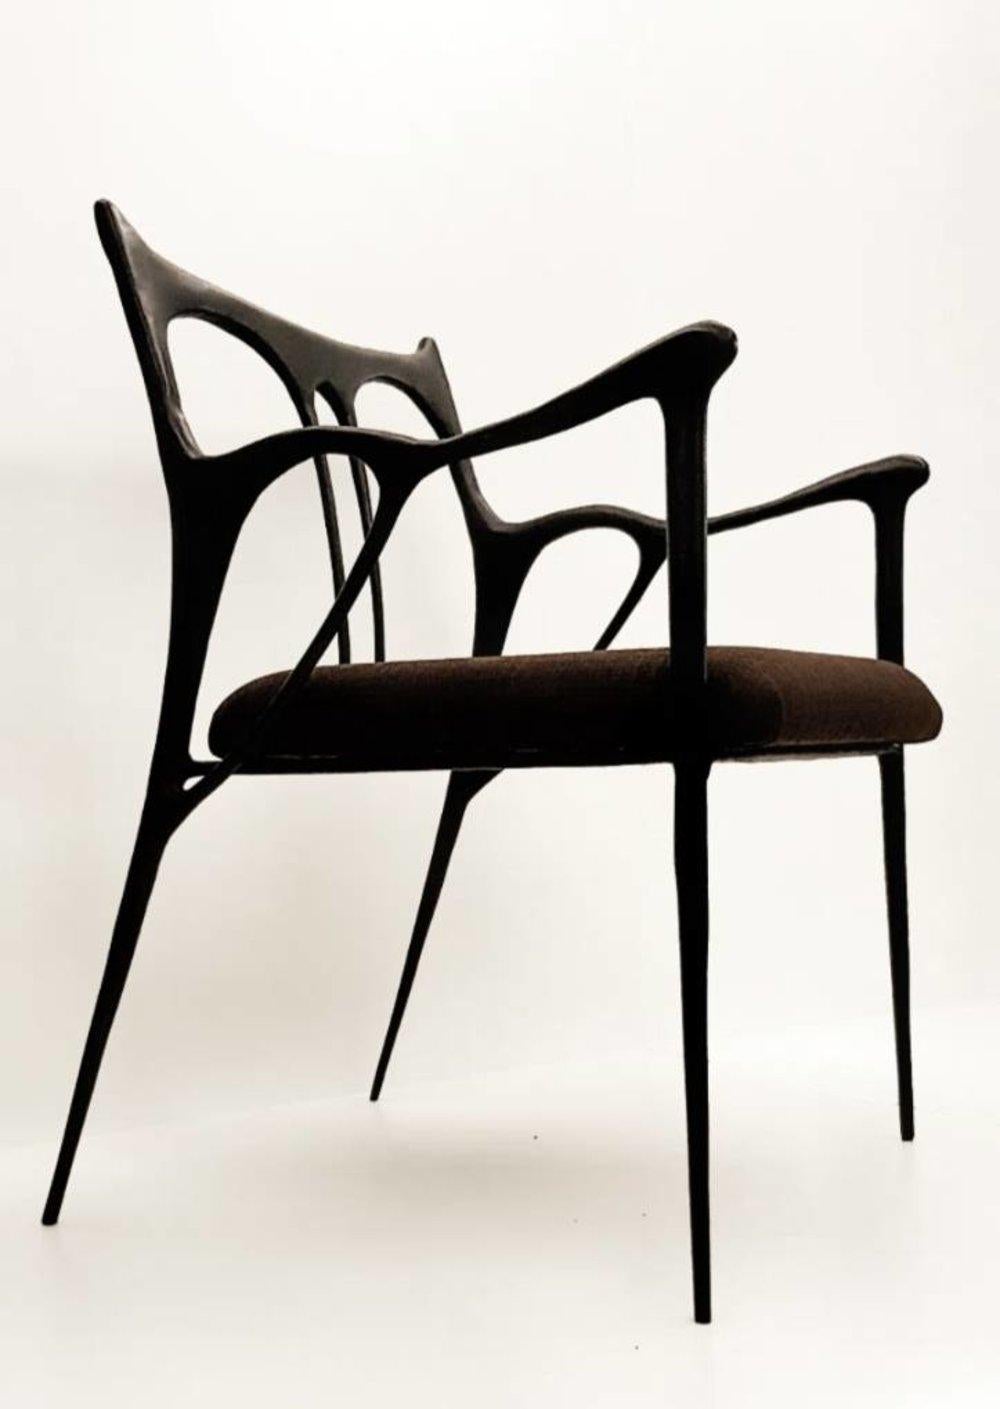 Black brass sculpted brass chair, Misaya
Dimensions: W 54 x L 58 x H 79 cm (seating: 63)
Hand-sculpted chair in brass.

The translation of Art Nouveau’s whiplash motifs through the subtle expression of an oriental brushstroke. The sculpturally